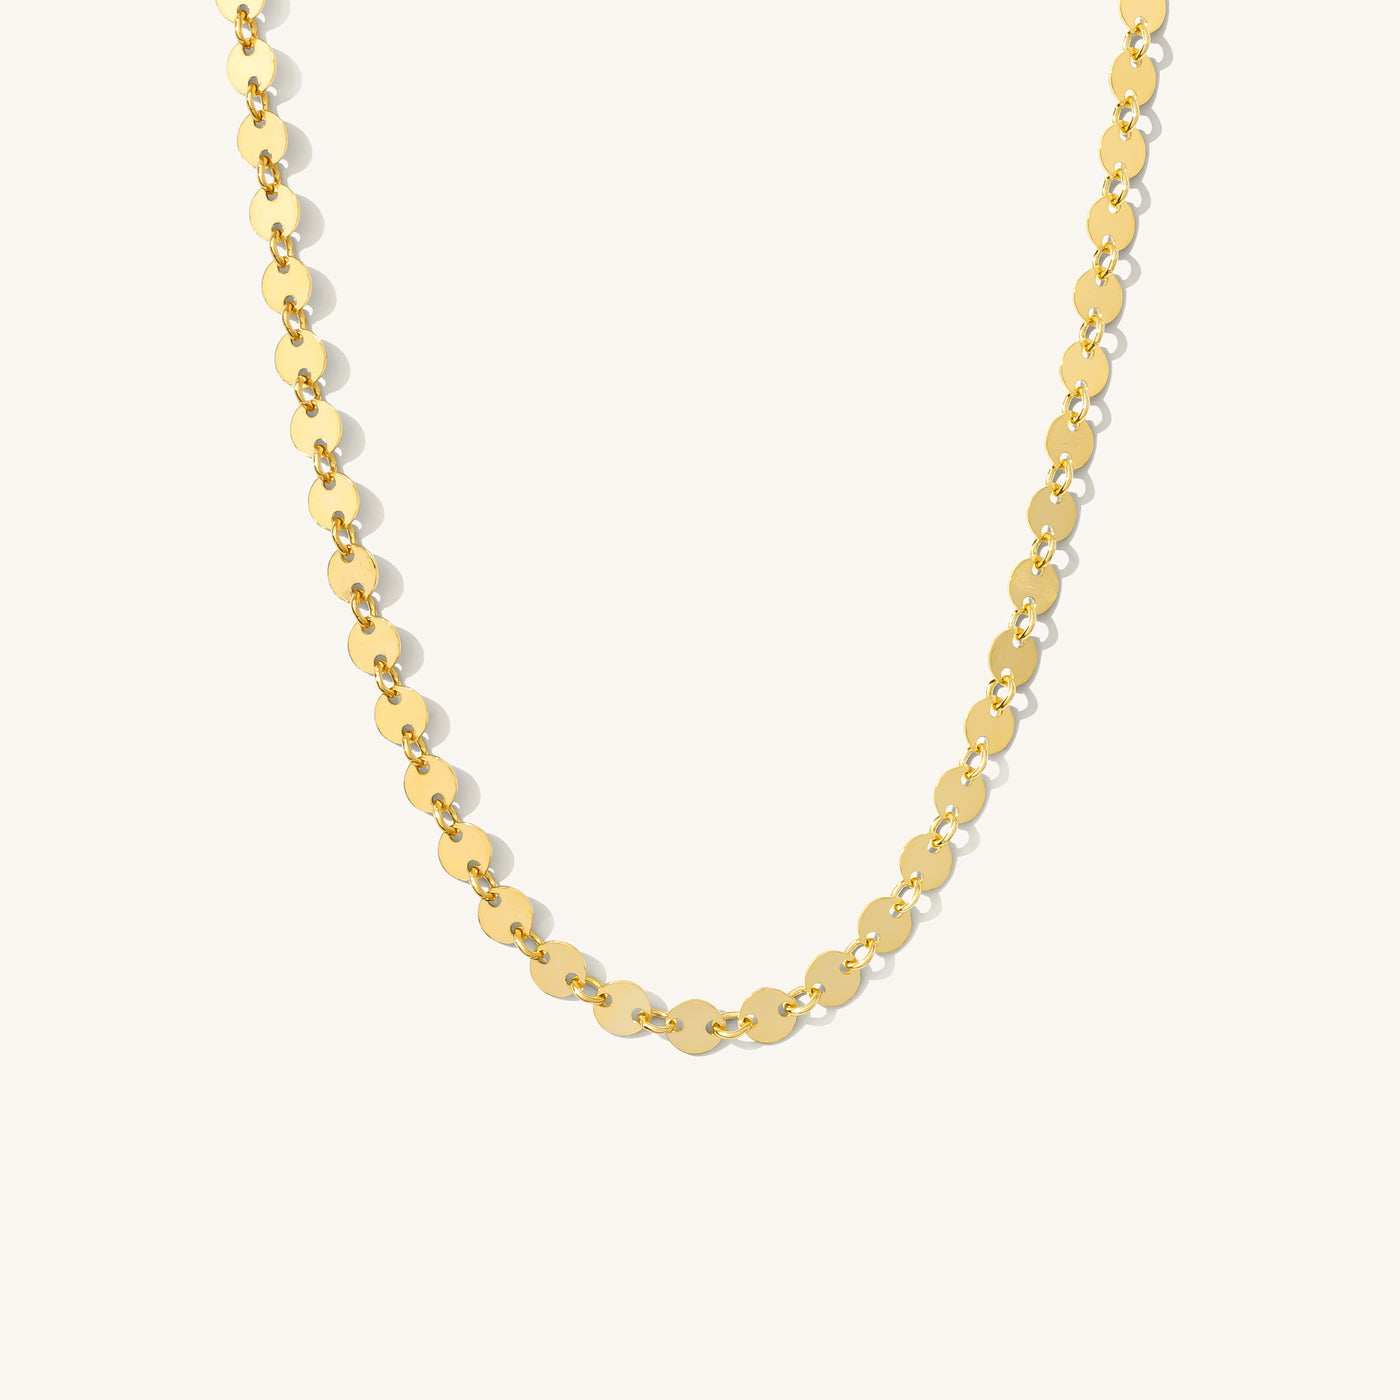 Coin Chain Necklace | Simple & Dainty Jewelry